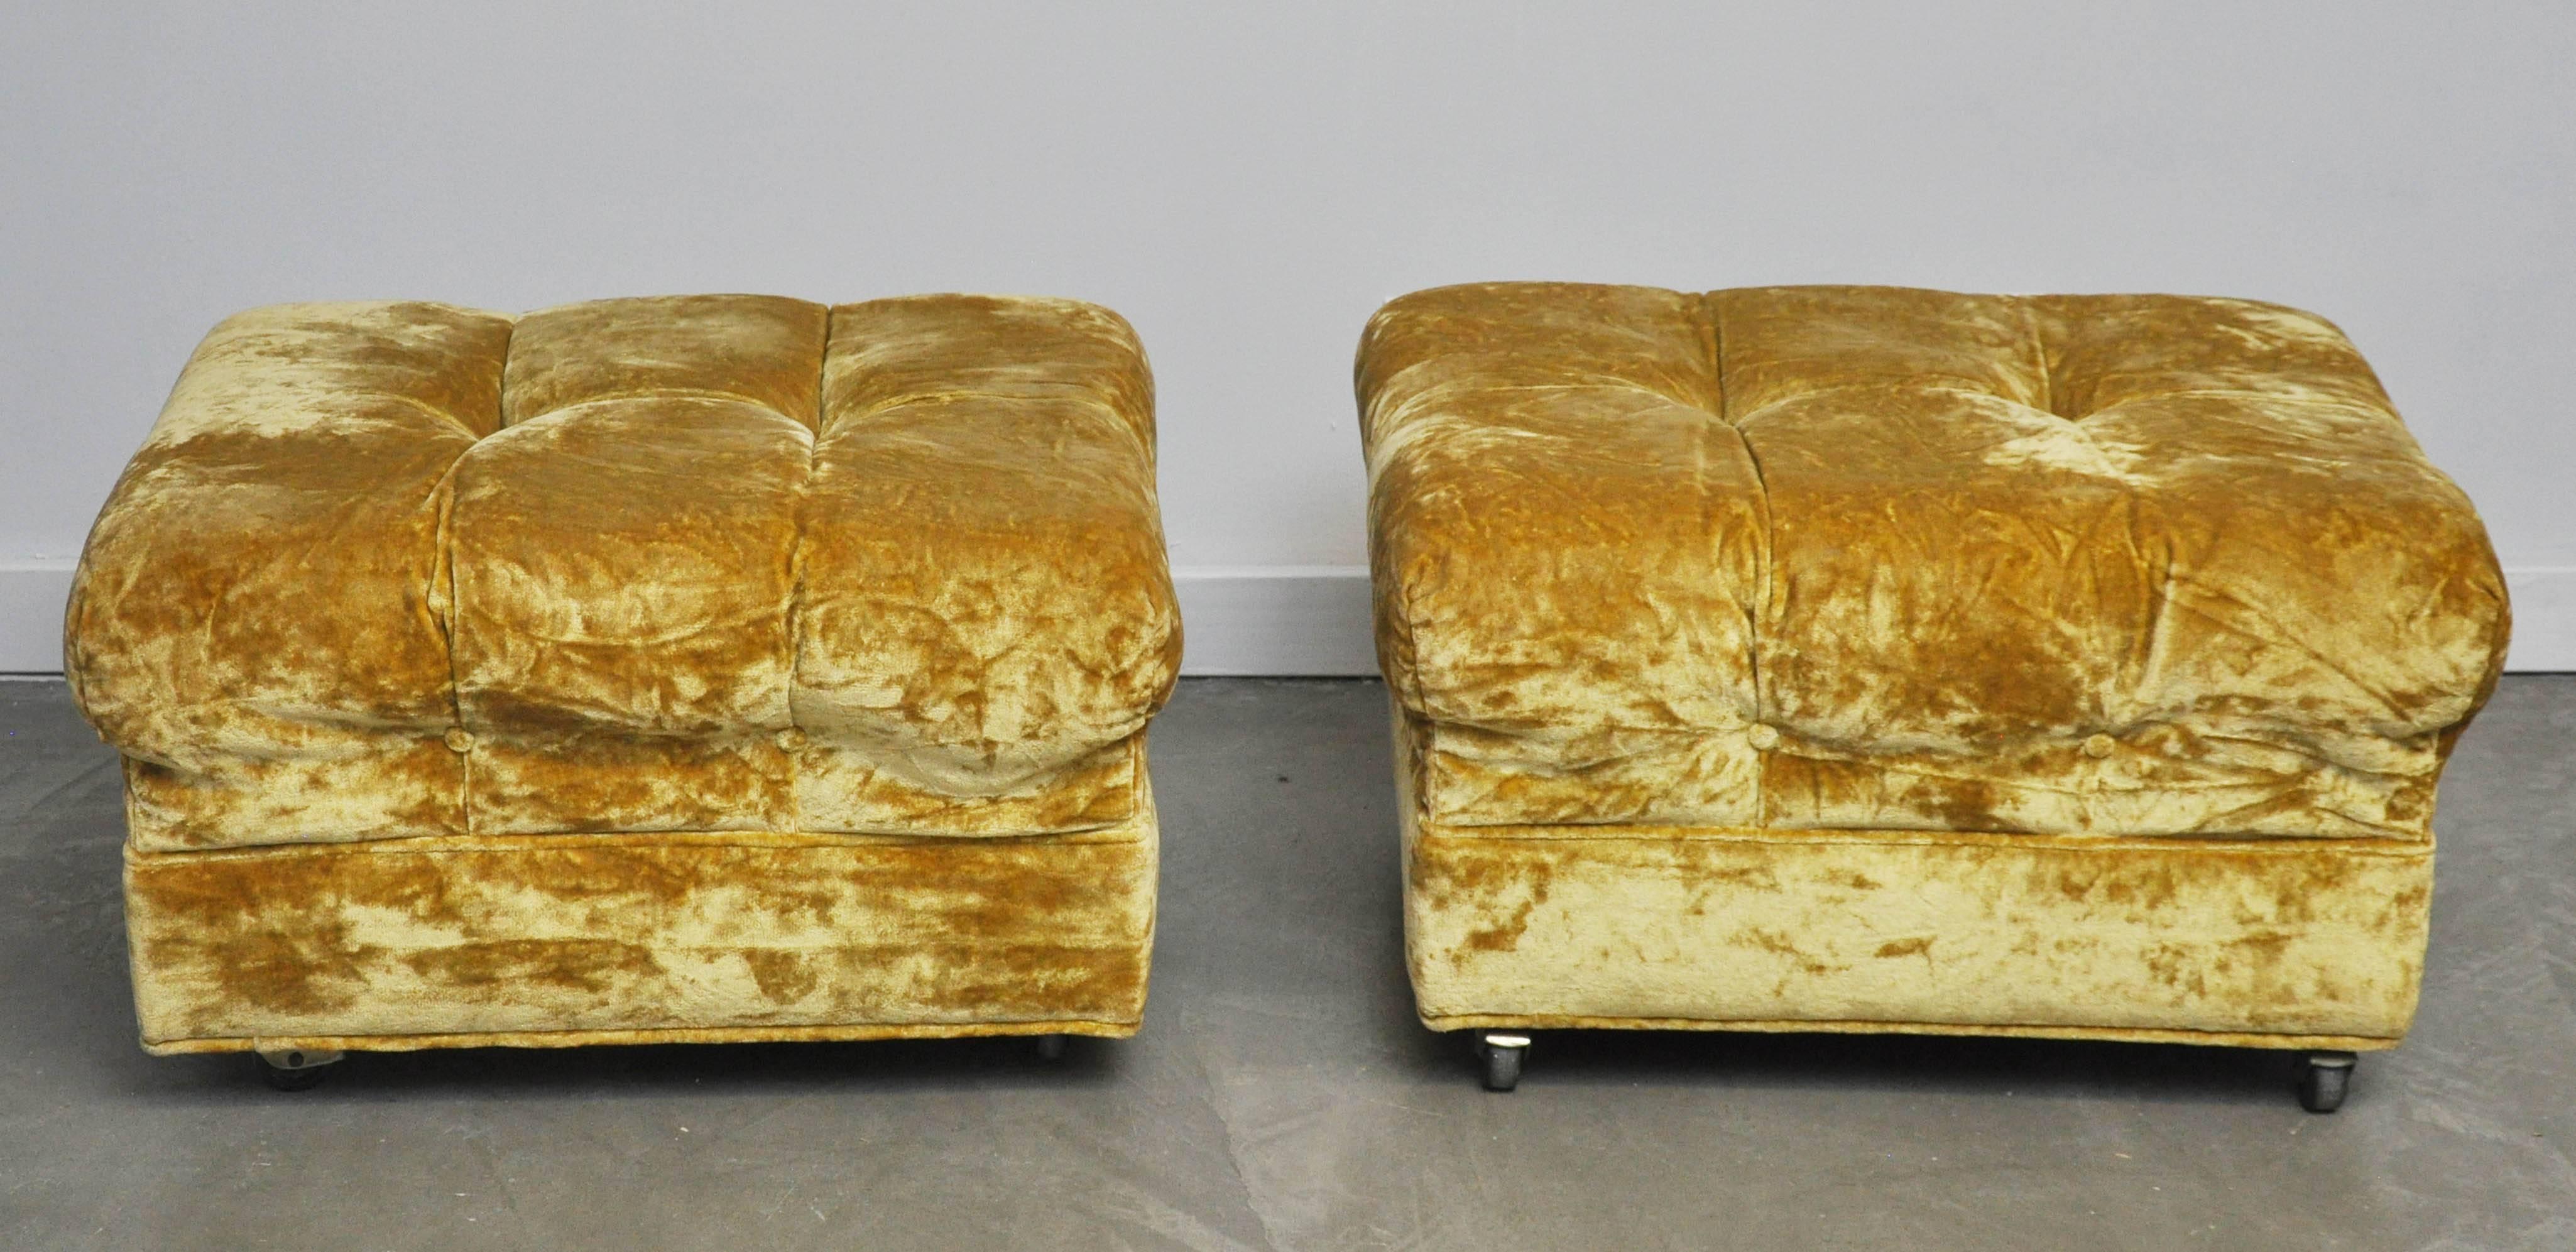 Pair of tufted rolling ottomans by Edward Wormley for Dunbar. These were designed to go with the Edward Wormley 